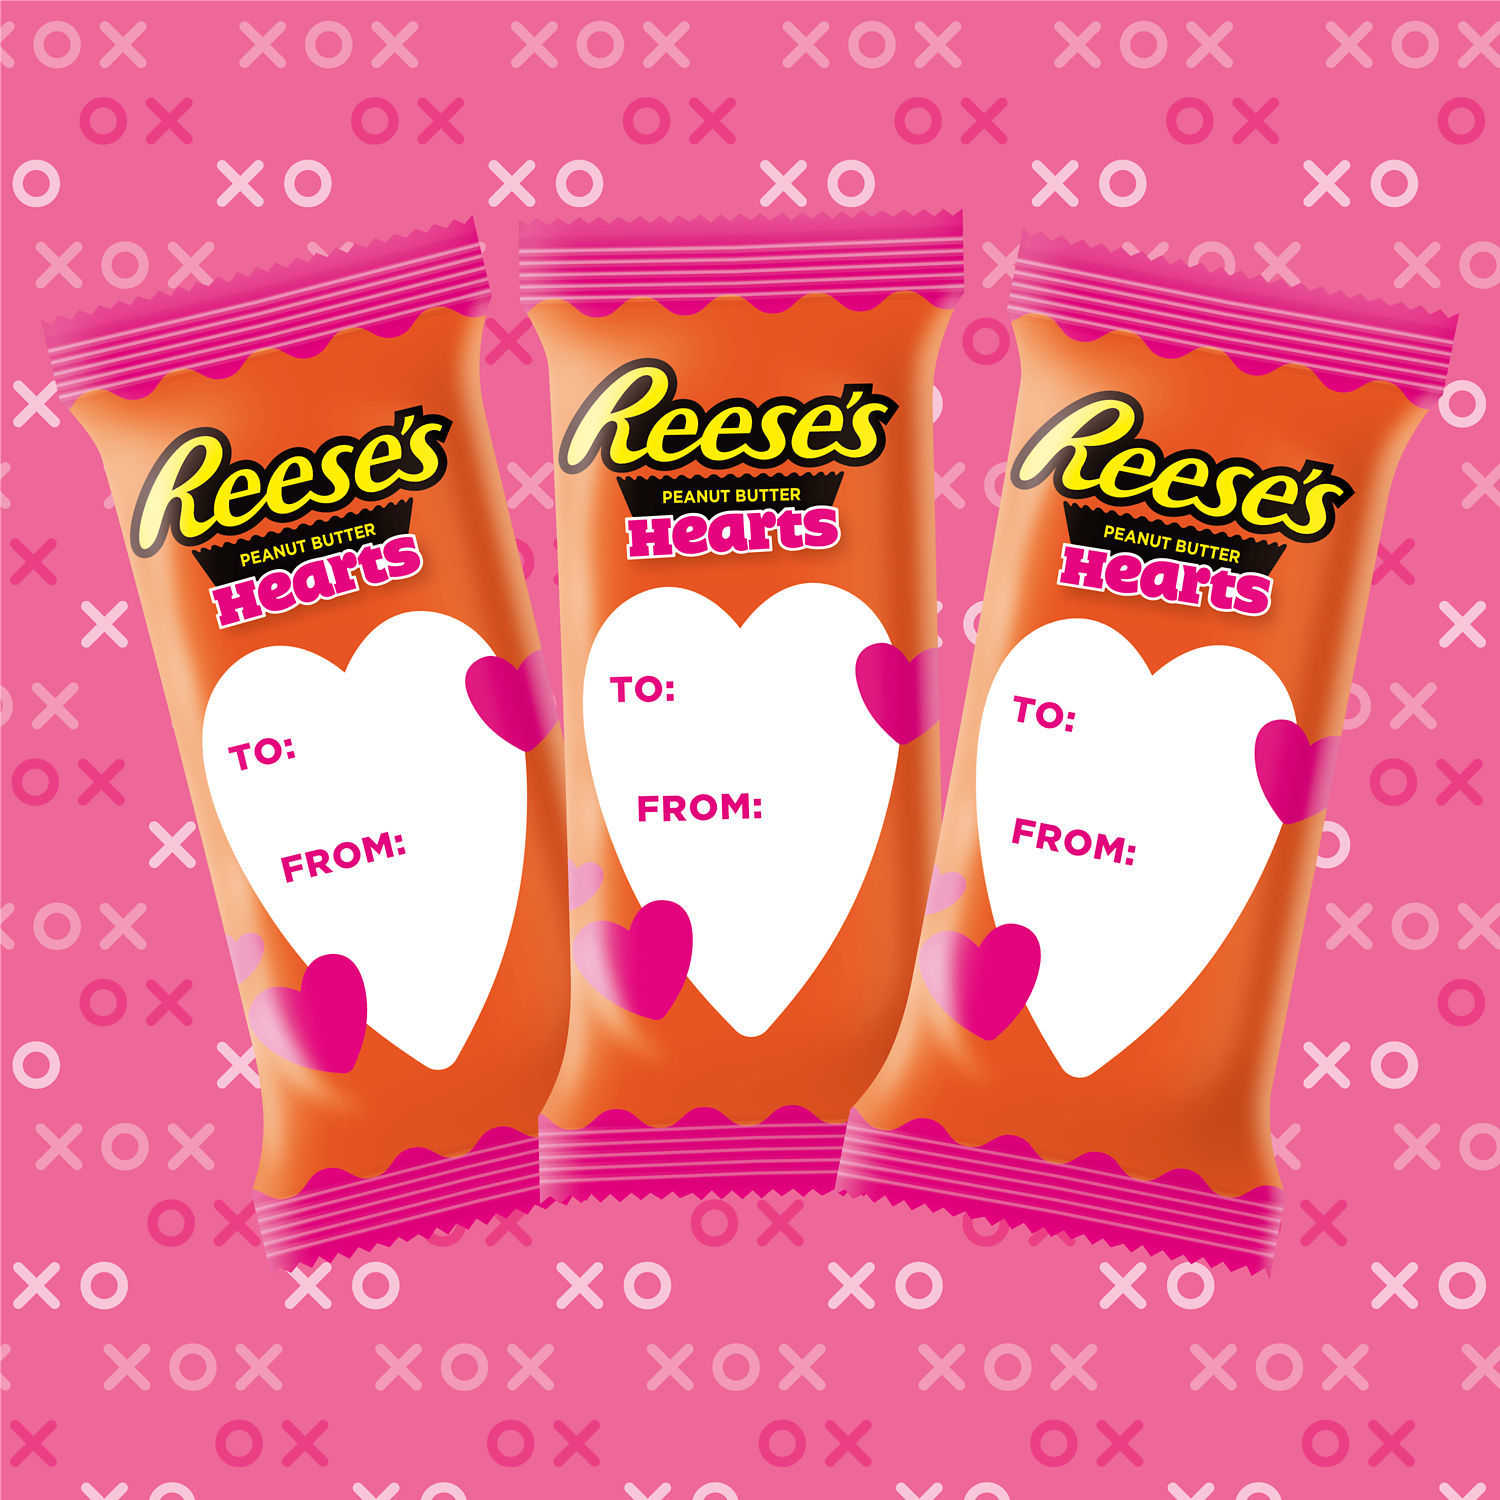 REESE'S, Milk Chocolate Peanut Butter Hearts Snack Size Candy, Valentine's Day, 52.2 oz, Bulk Bag (87 Pieces) - image 3 of 6